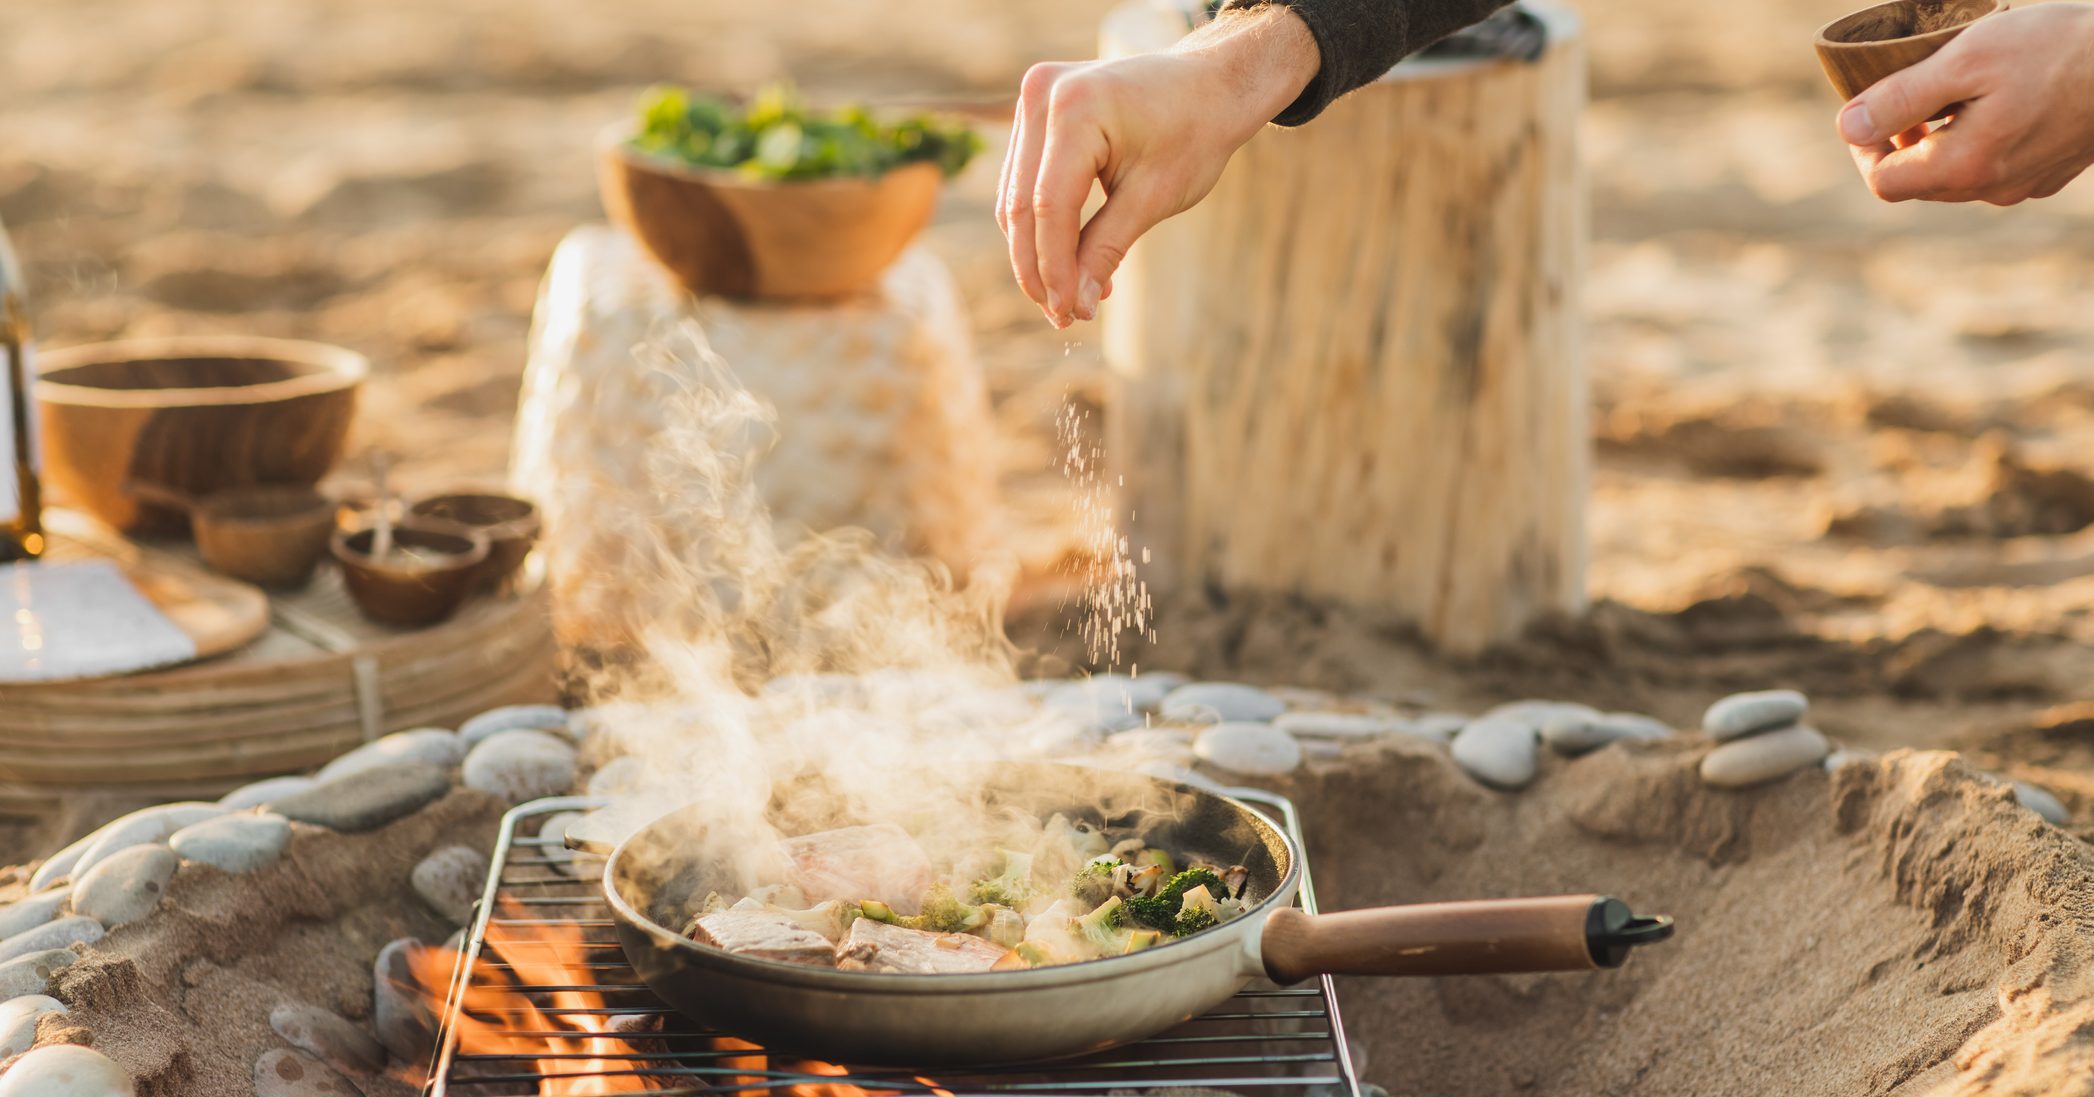 18 Best Campfire Cooking Equipment to Add to Your Camp Kitchen